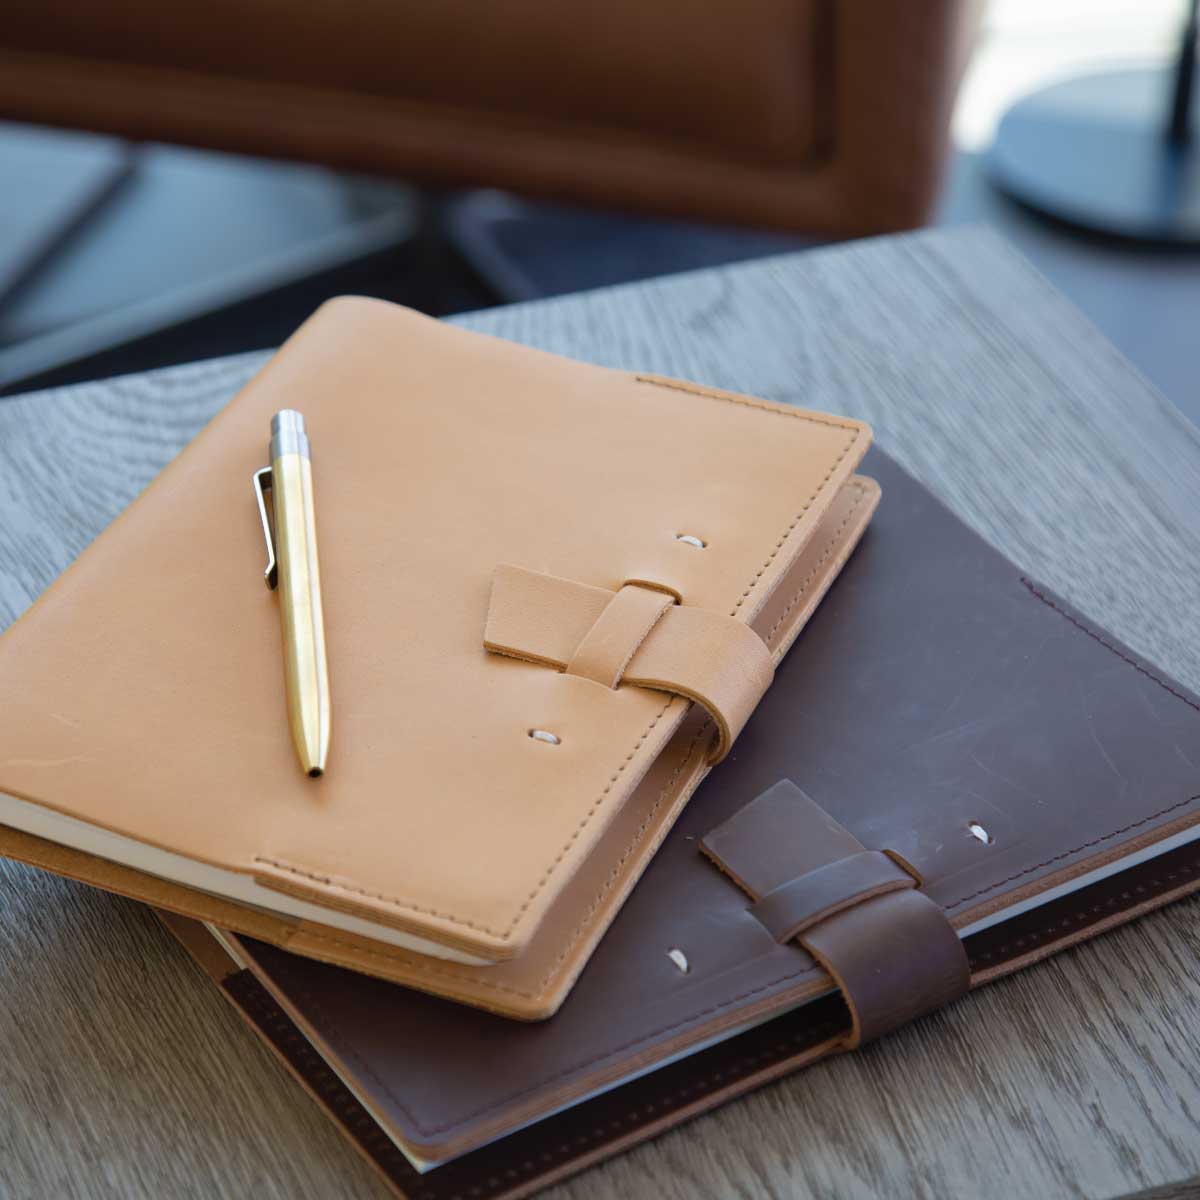 Handmade Switchback Leather Notebook